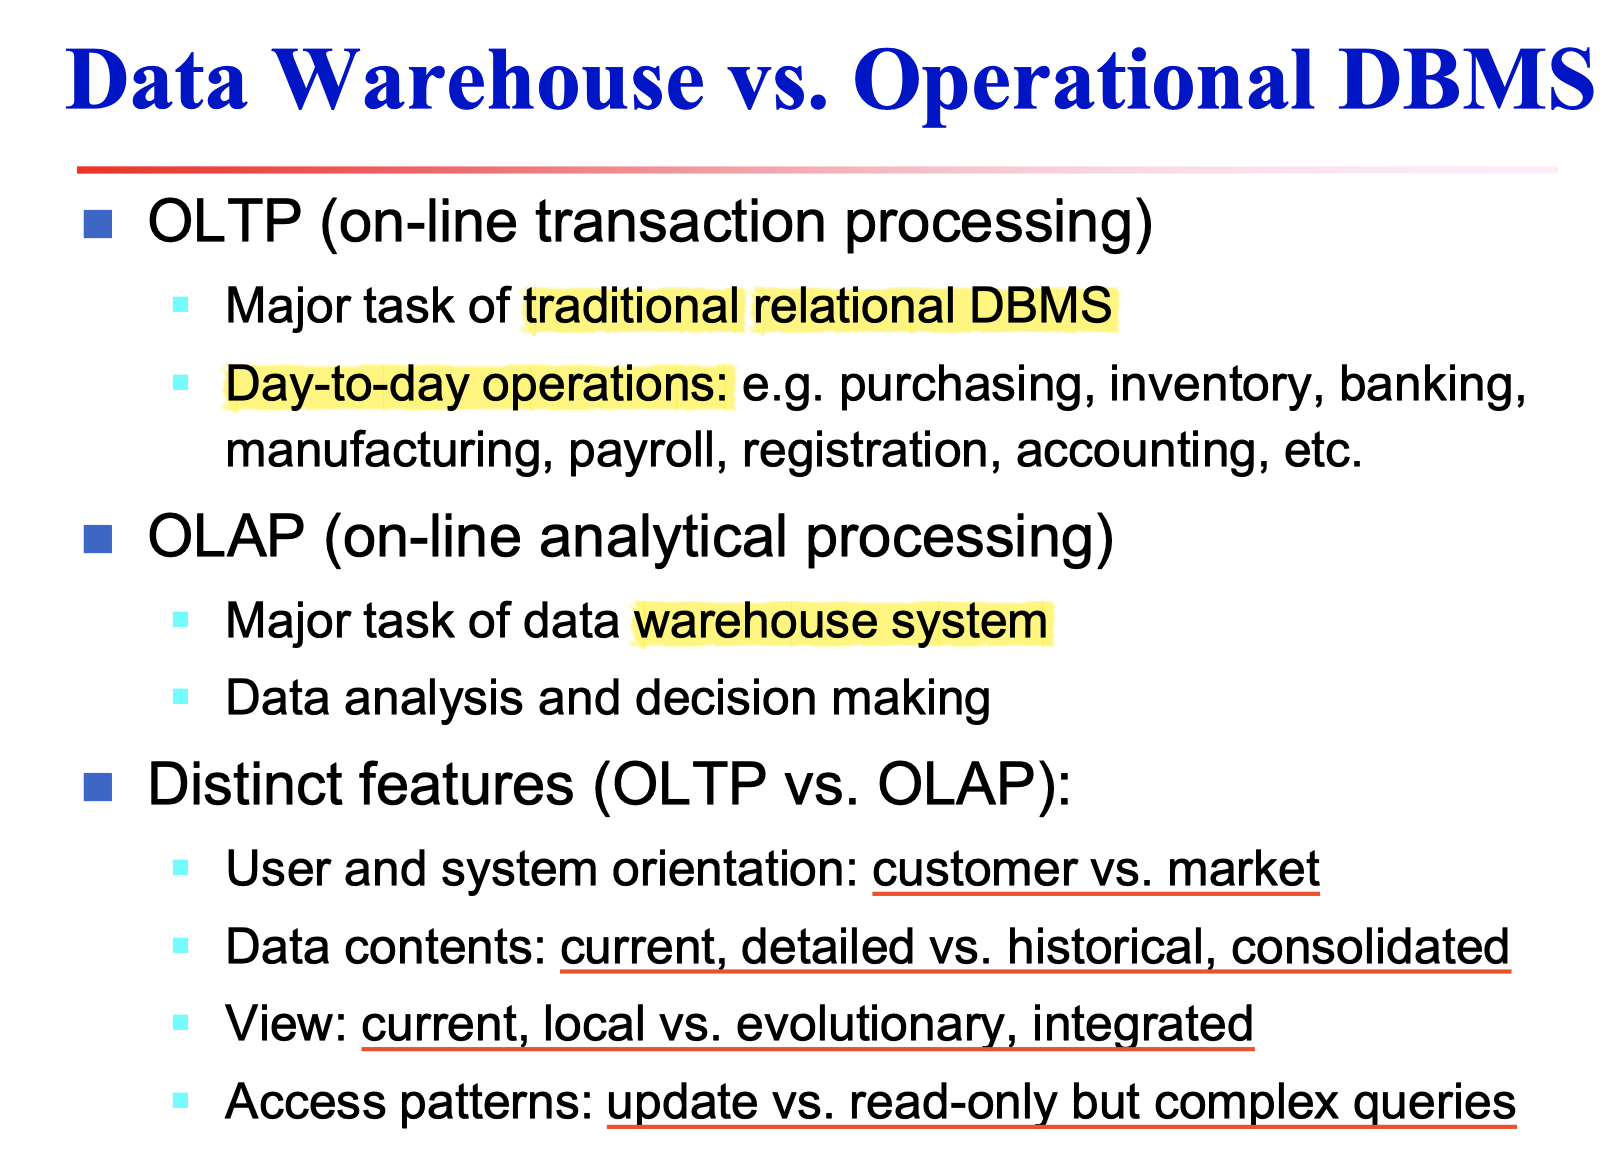 OLTP and OLAP